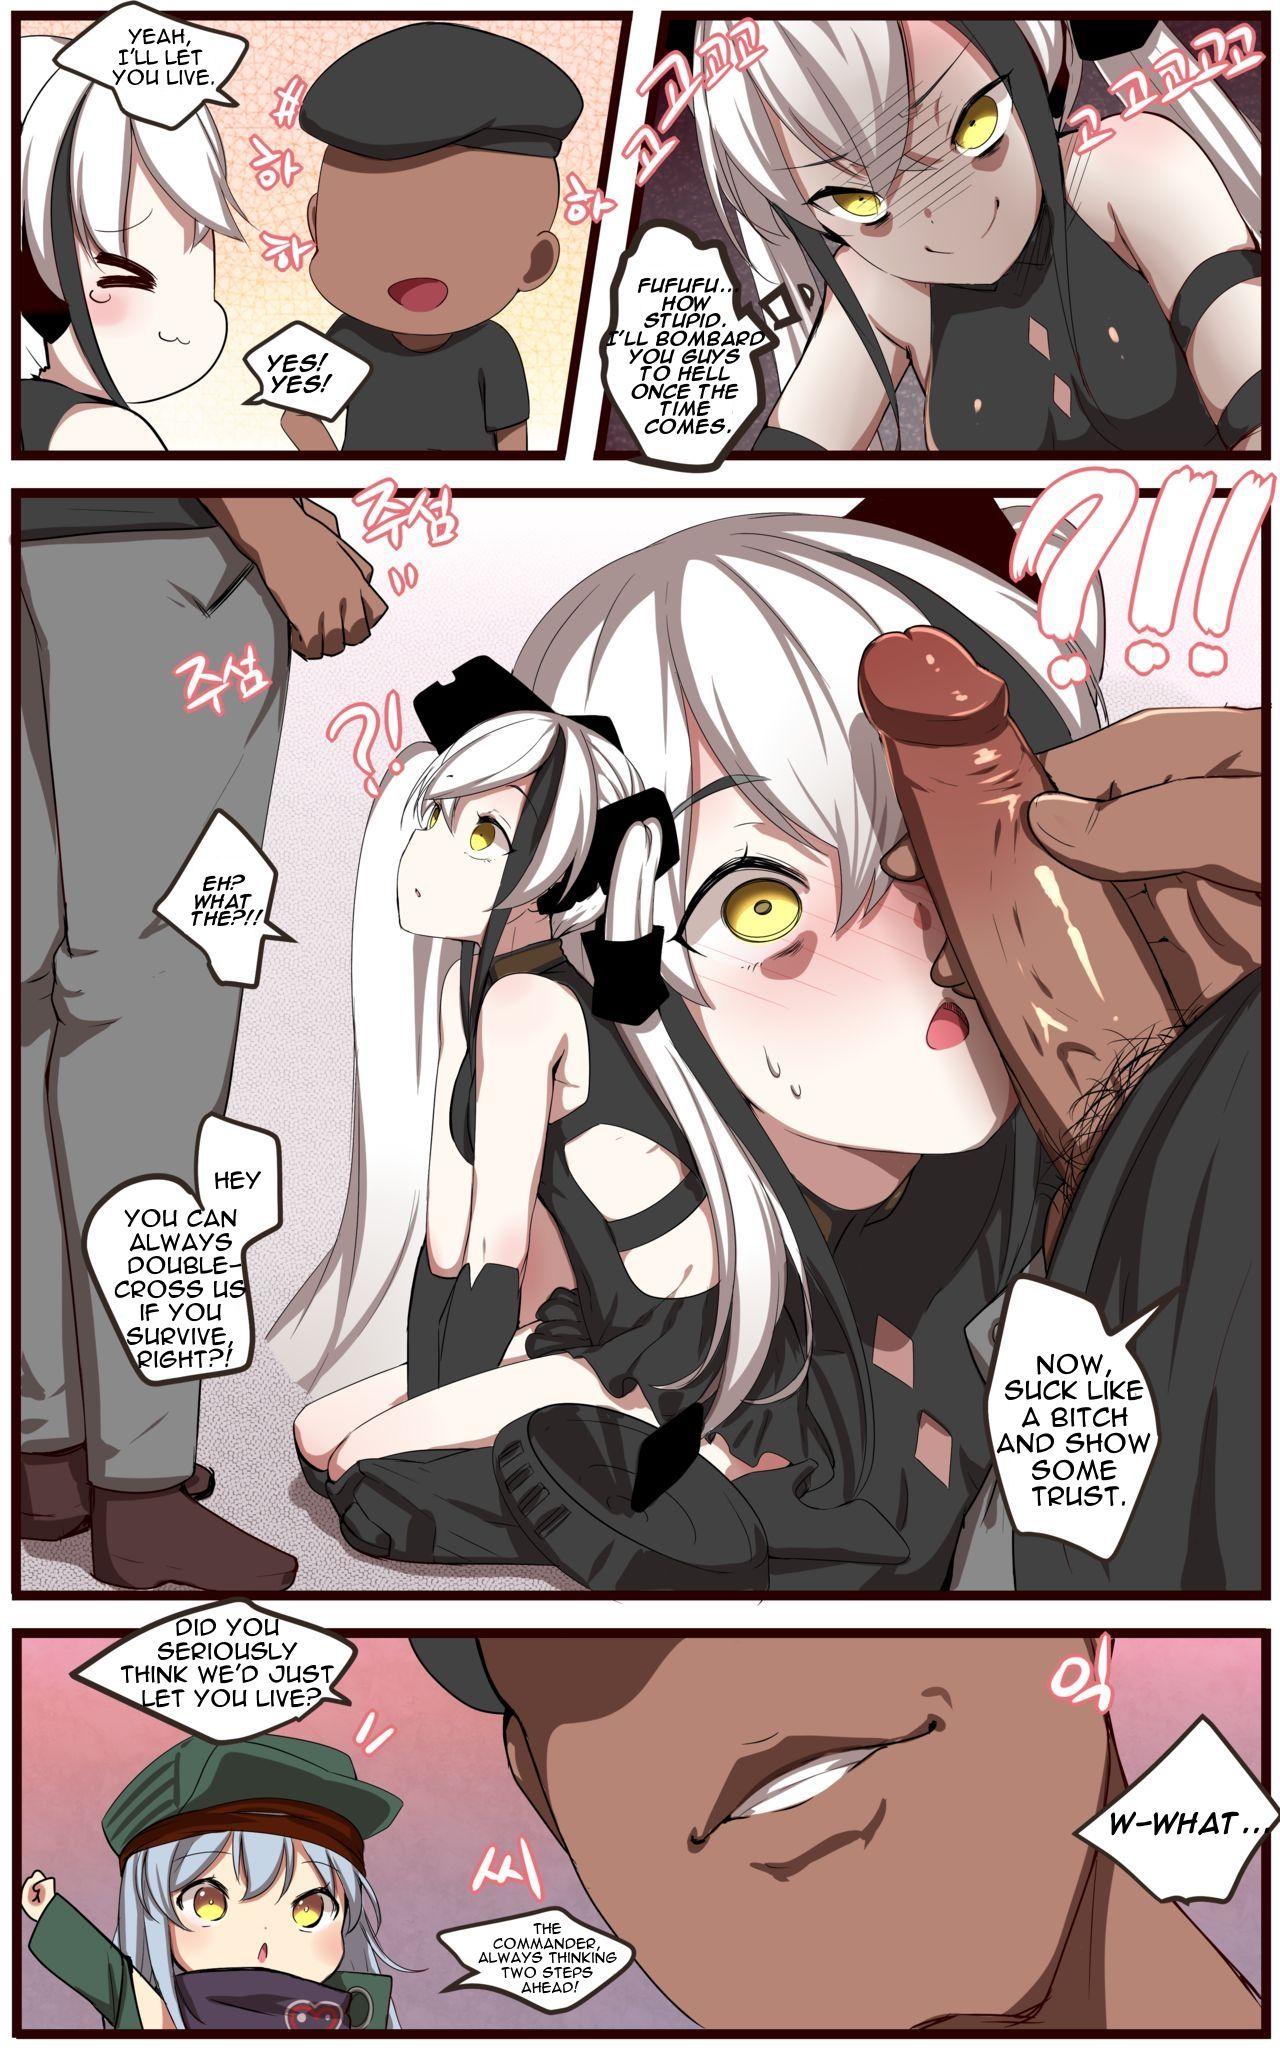 Bikini How to use dolls 06 - Girls frontline Oral Sex - Page 4